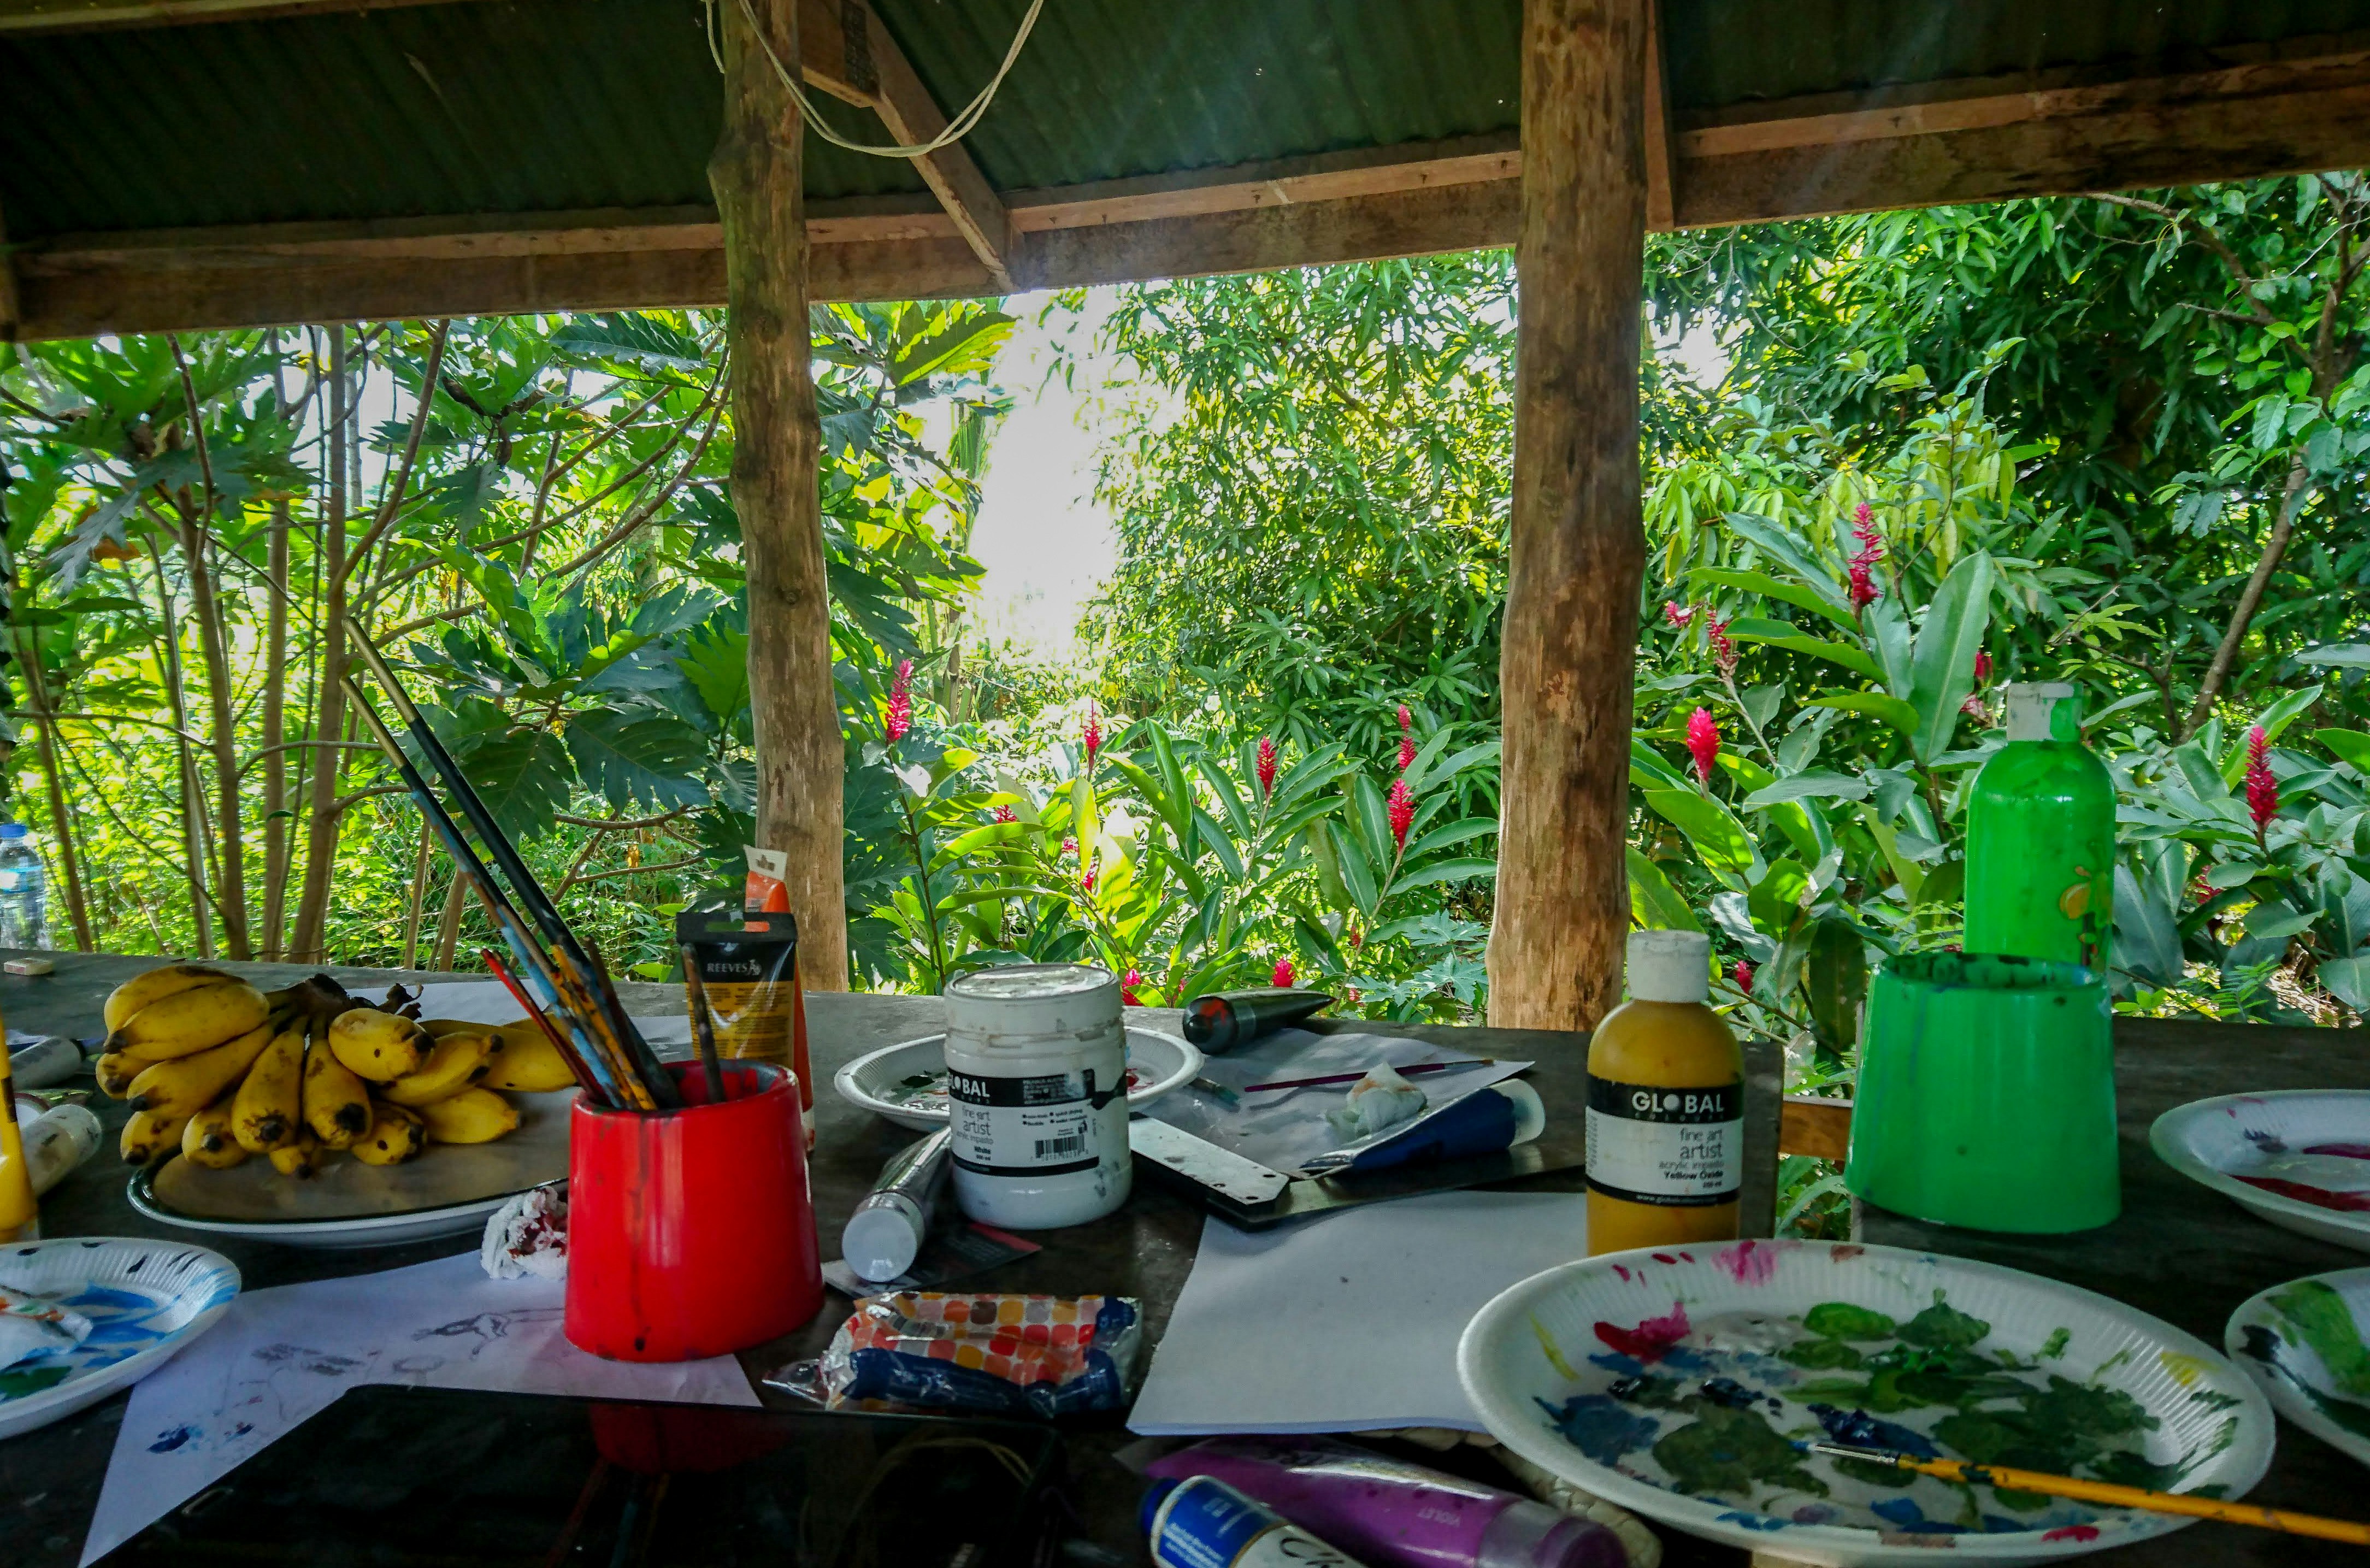 A table set up with paints, paintbrushes, palettes and a plate of bananas outdoors, surrounded by tropical vegetation. 